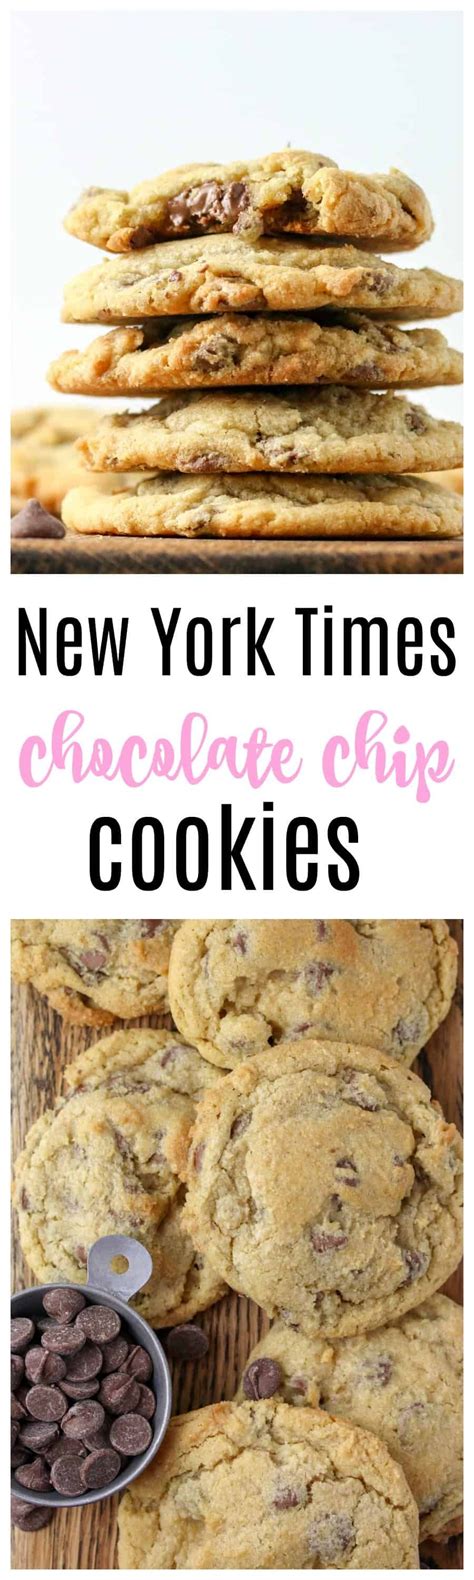 Our classic, perfect chocolate chip cookies have a tinge of caramel flavor and are studded with chocolate goodness. New York Times Chocolate Chip Cookies | Recipe | Chocolate chip cookies, Delicious cookie ...